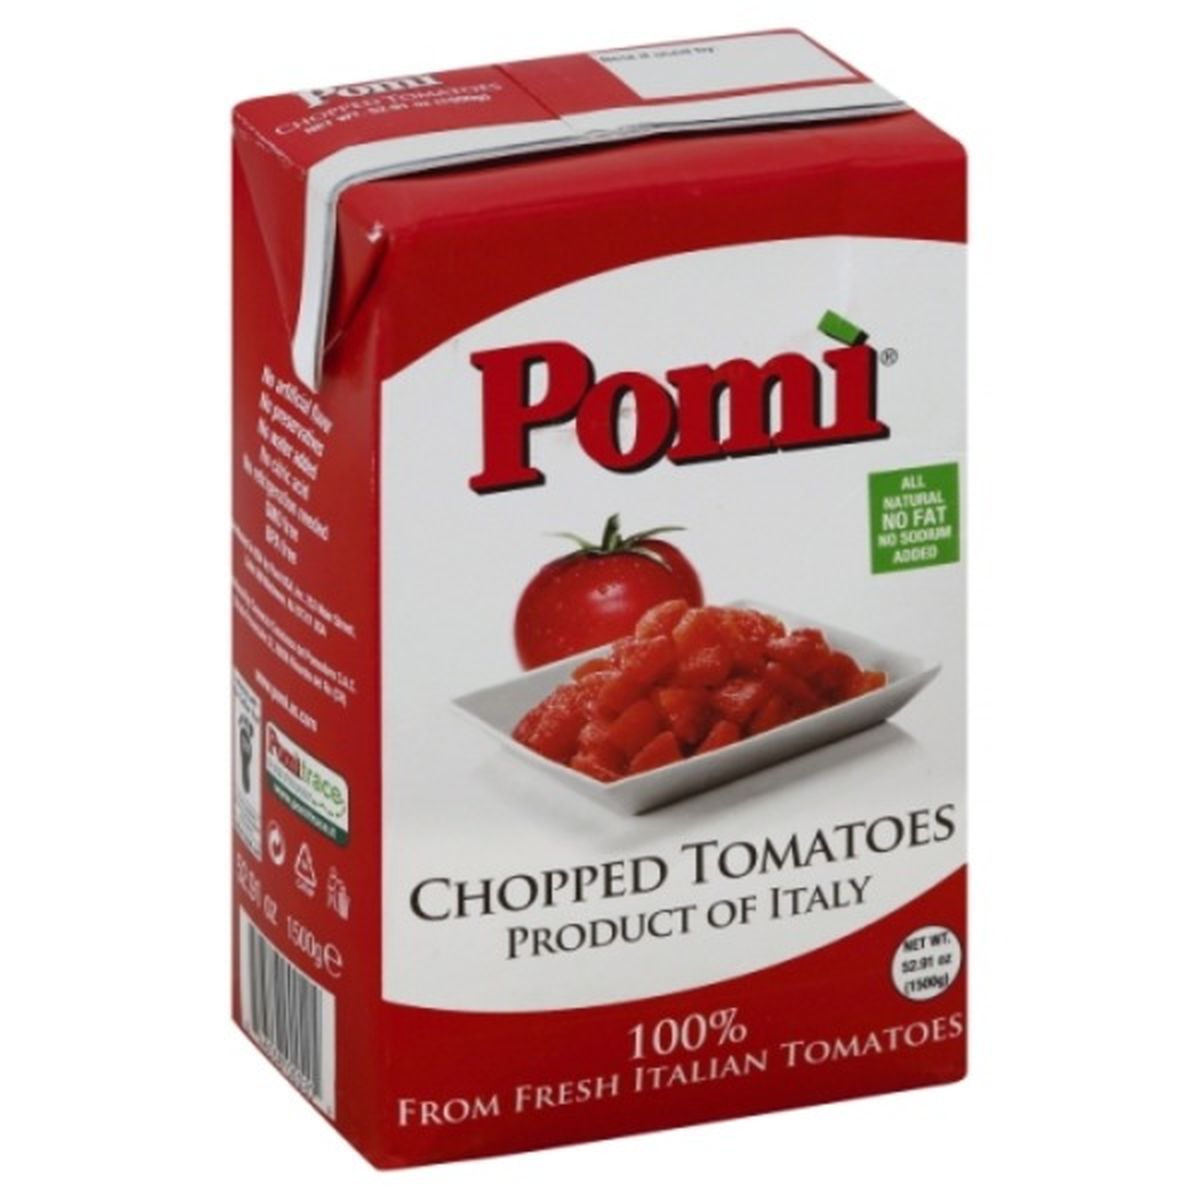 Calories in Pomi Tomatoes, Chopped